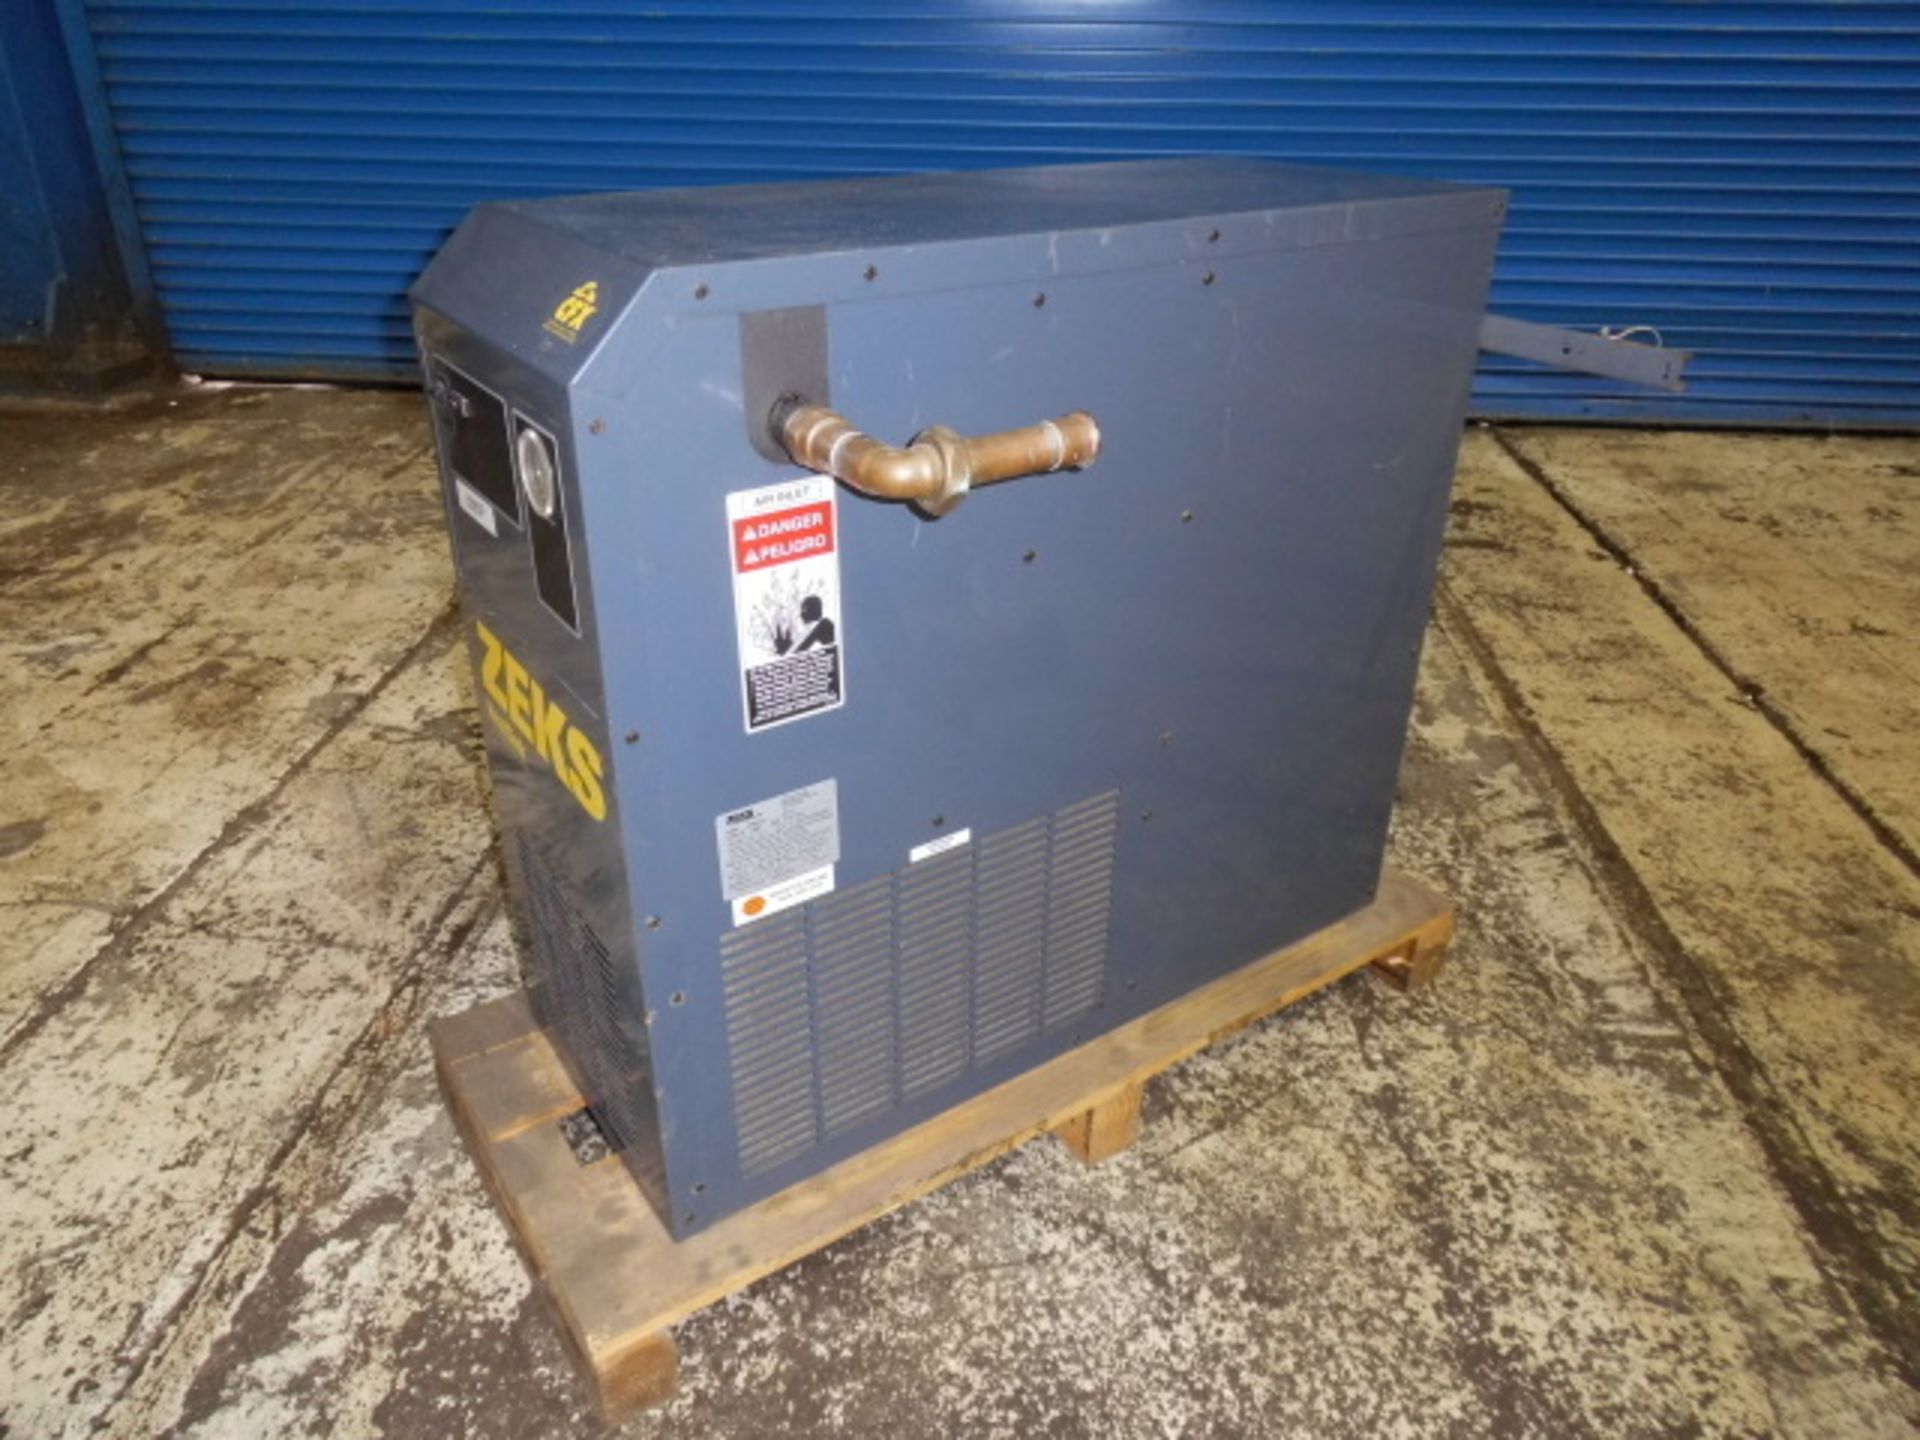 Zeks Heat Sink Refrigerated Air Dryer | 75 CFM x 200 PSIS, Mdl: 75SGA100, S/N: 270901, Located In: - Image 2 of 4